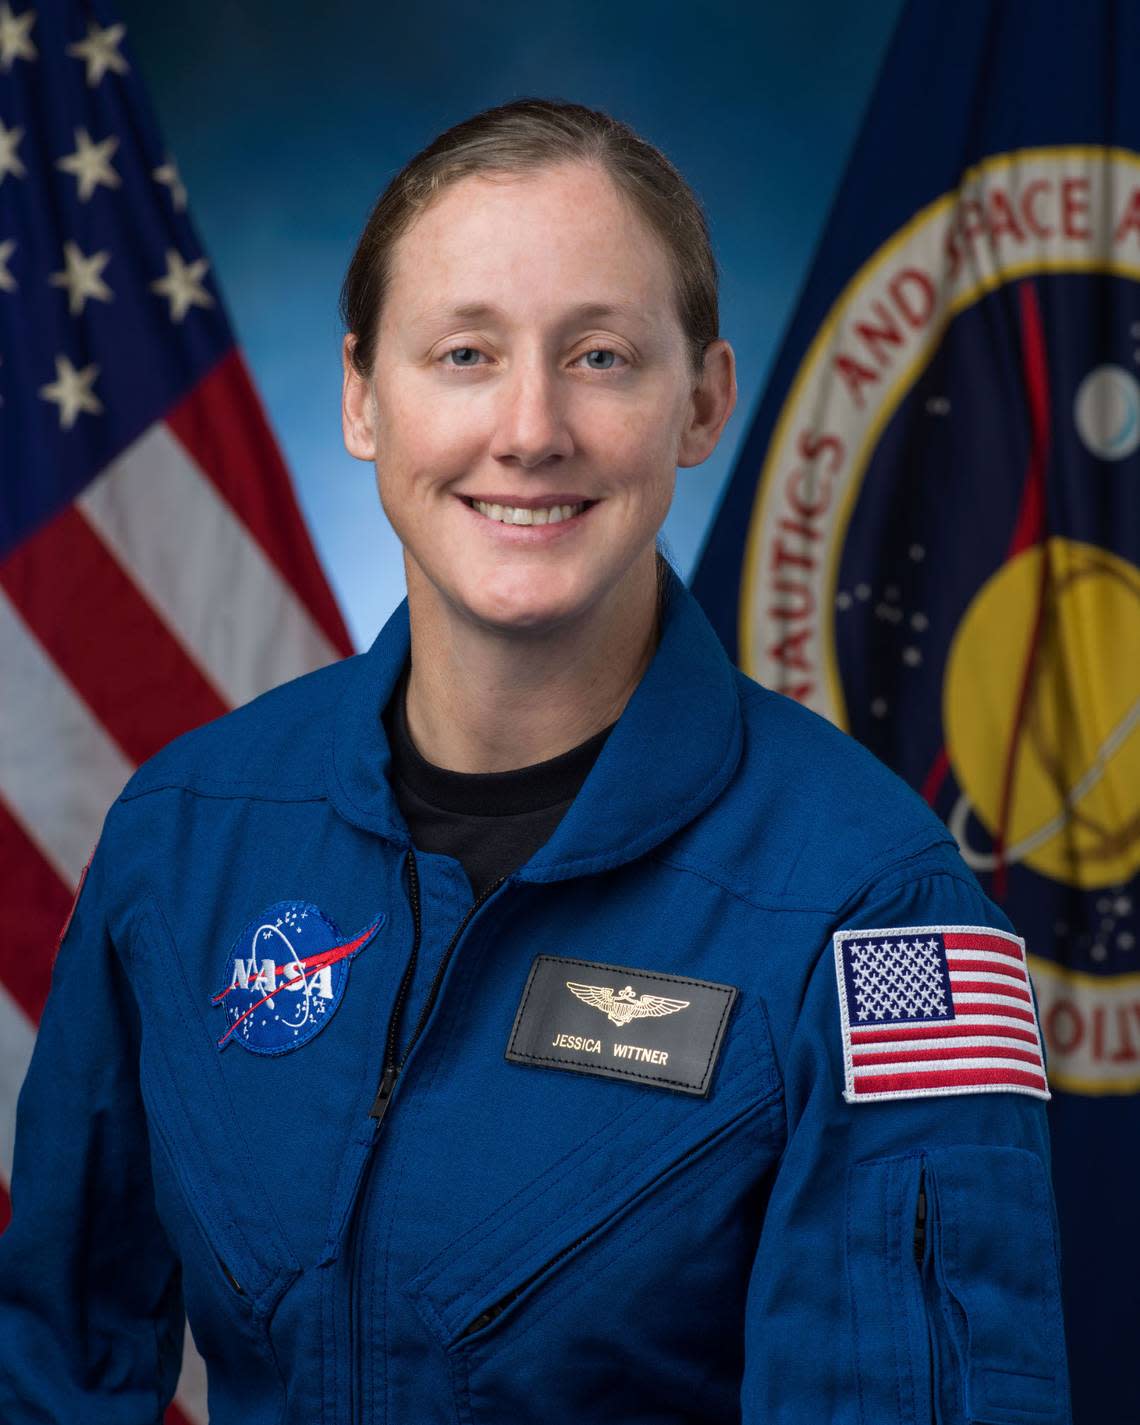 Jessica Wittner graduated from NASA’s training program during a ceremony at the Johnson Space Center in Houston.